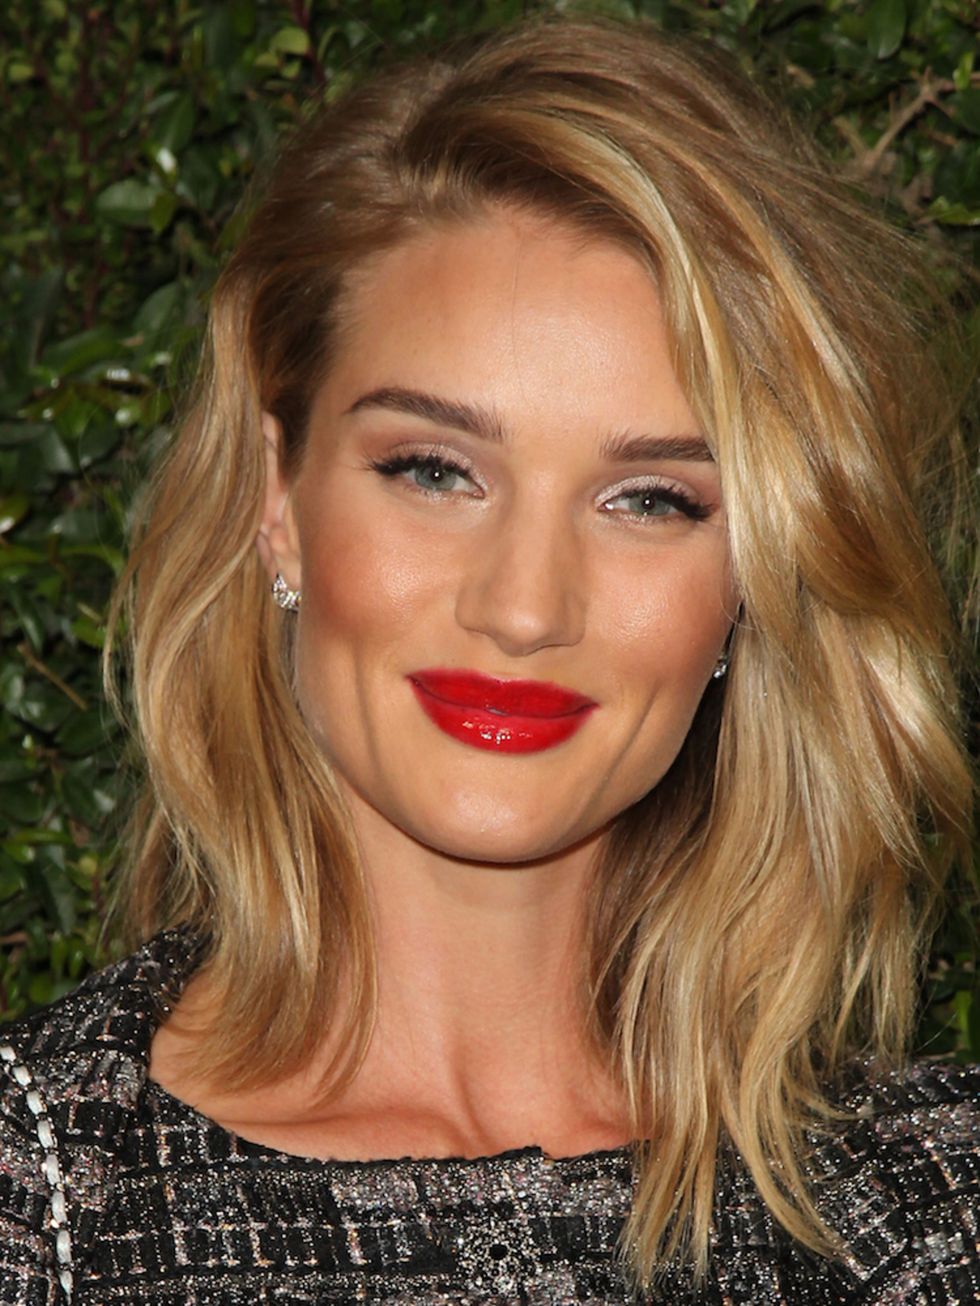 <p><strong>Rosie Huntington-Whitely  </strong><br />
<span style="line-height:1.6"><strong>Username: rosiehw </strong><br />
<br />
Why follow? Follow to discover Rosies beauty secrets and see just what is involved in her daily make-up routine. Her snapc